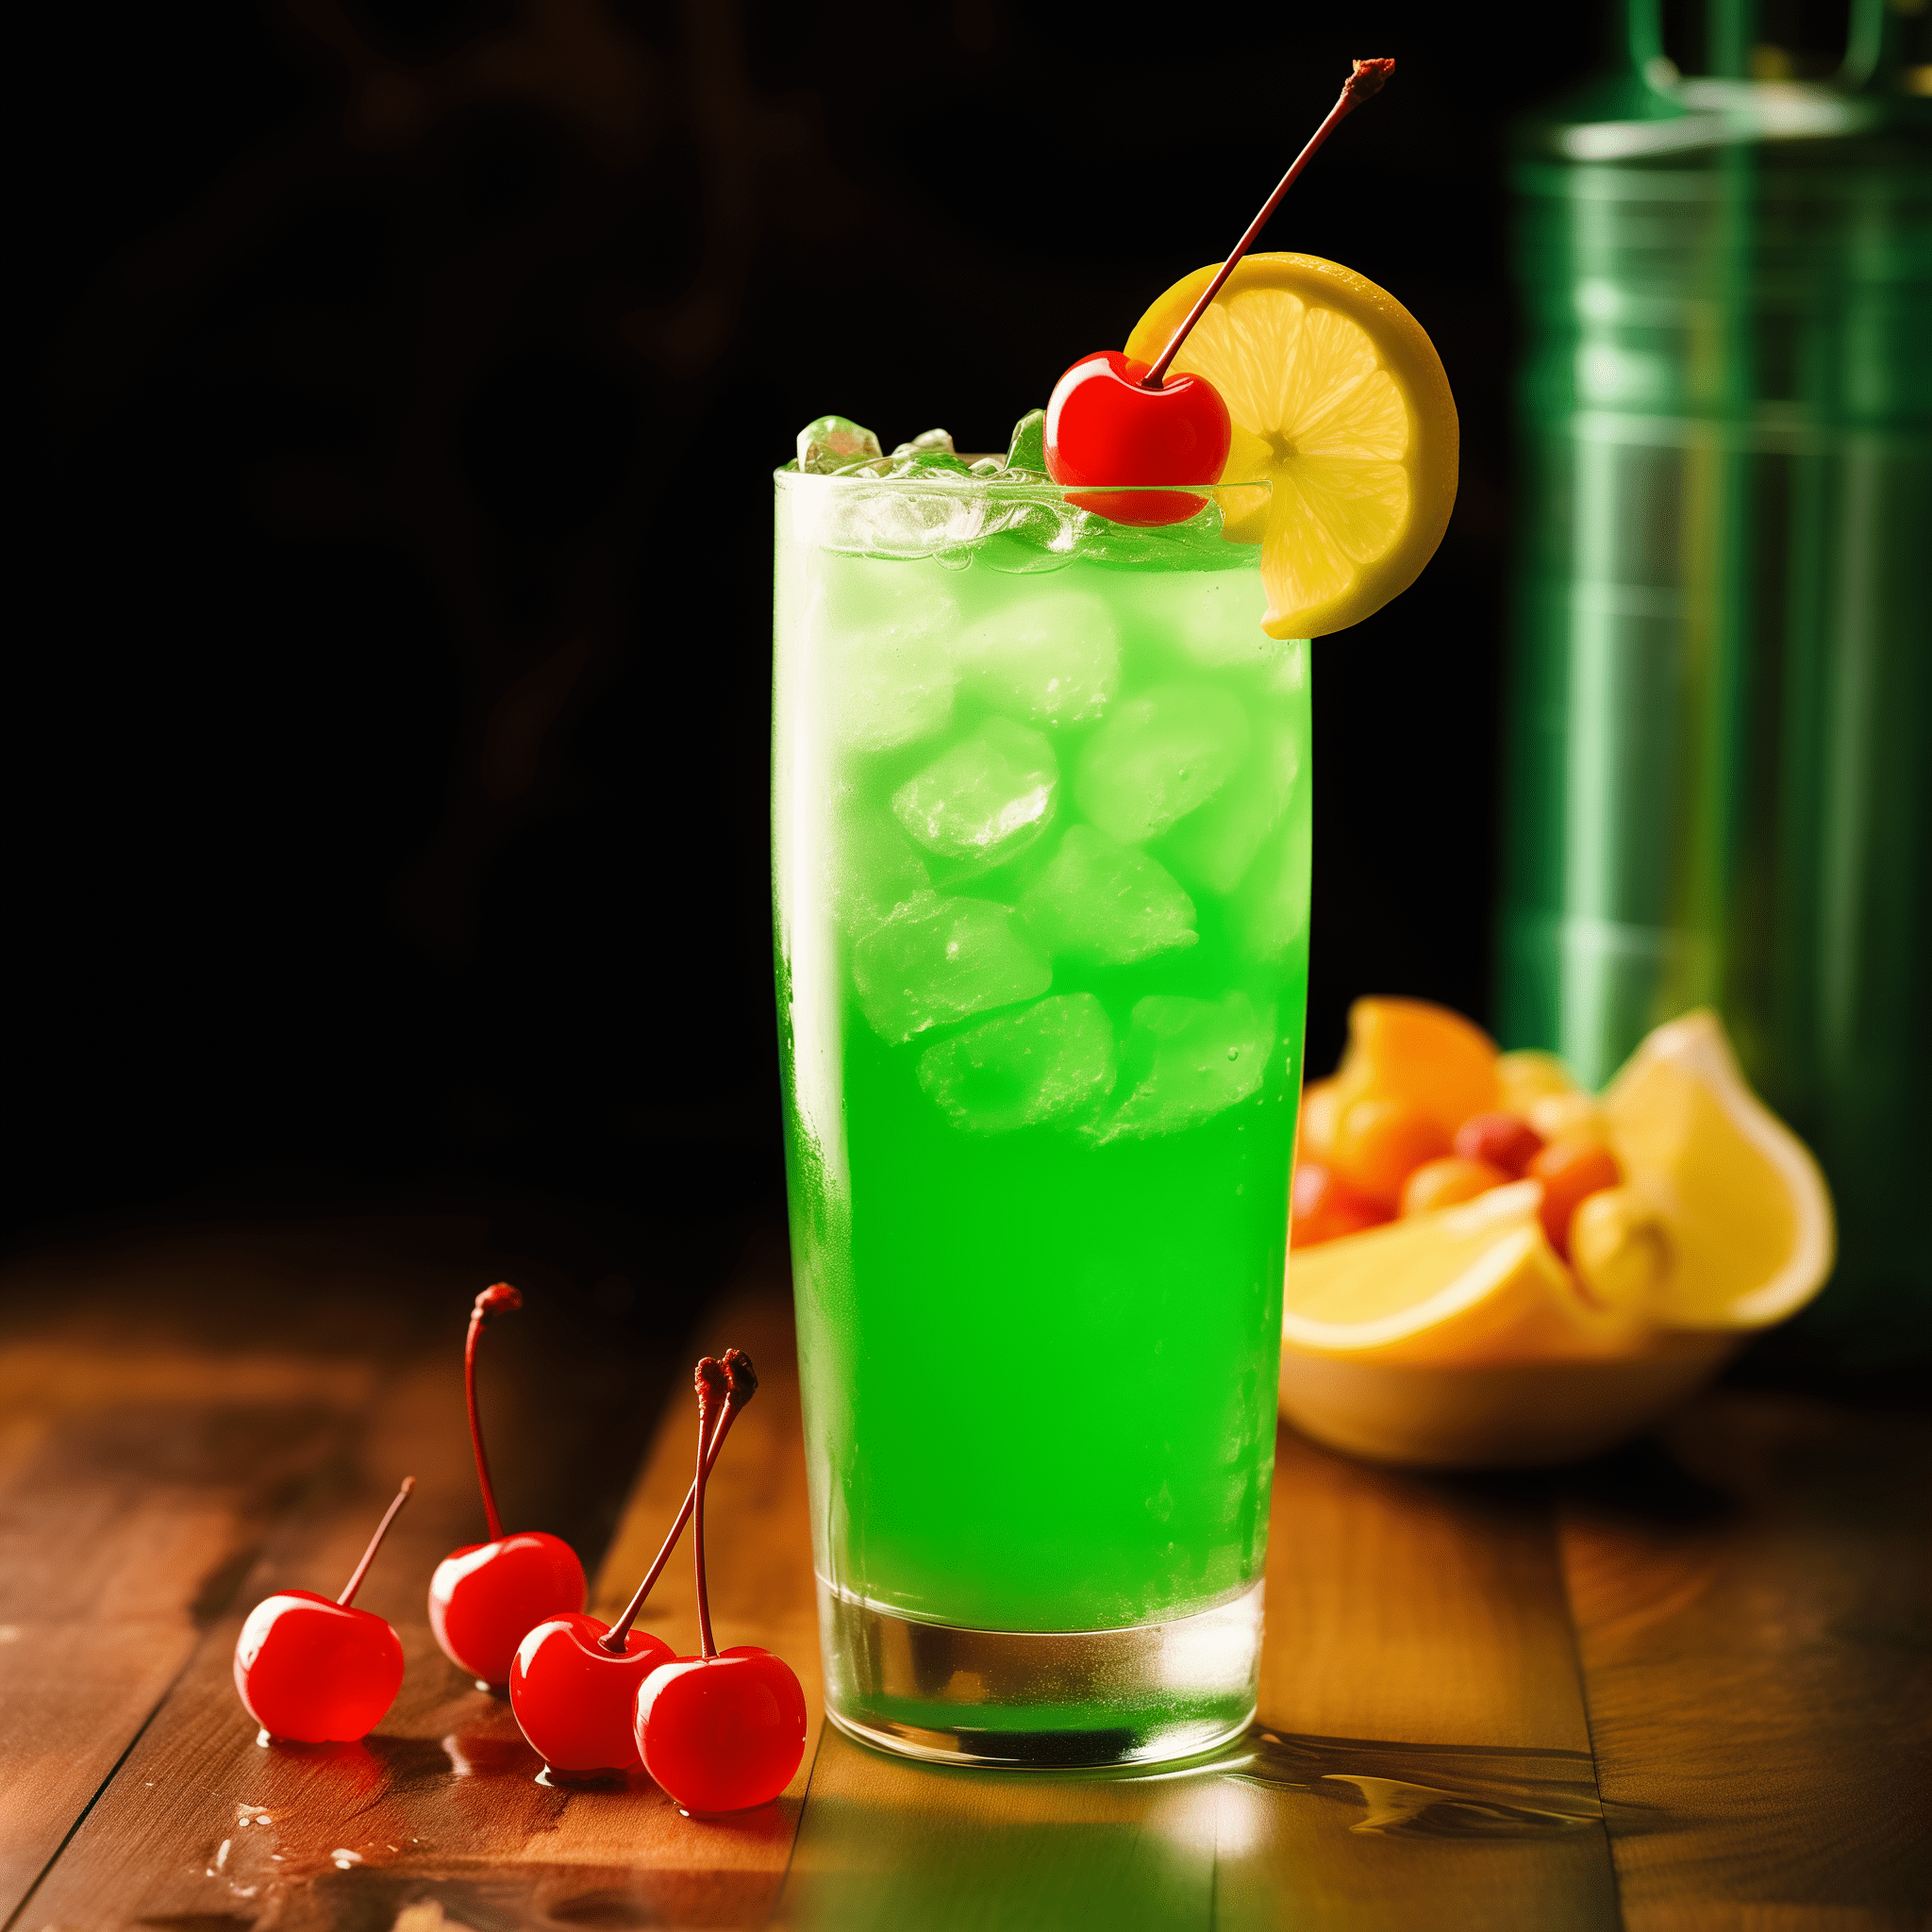 Drunk Leprechaun Cocktail Recipe - The Drunk Leprechaun is a delightful mix of sweet and citrus flavors with a hint of tropical essence, thanks to the orange juice and blue curacao. The vodka provides a smooth, strong backbone that carries the flavors well without overpowering them.